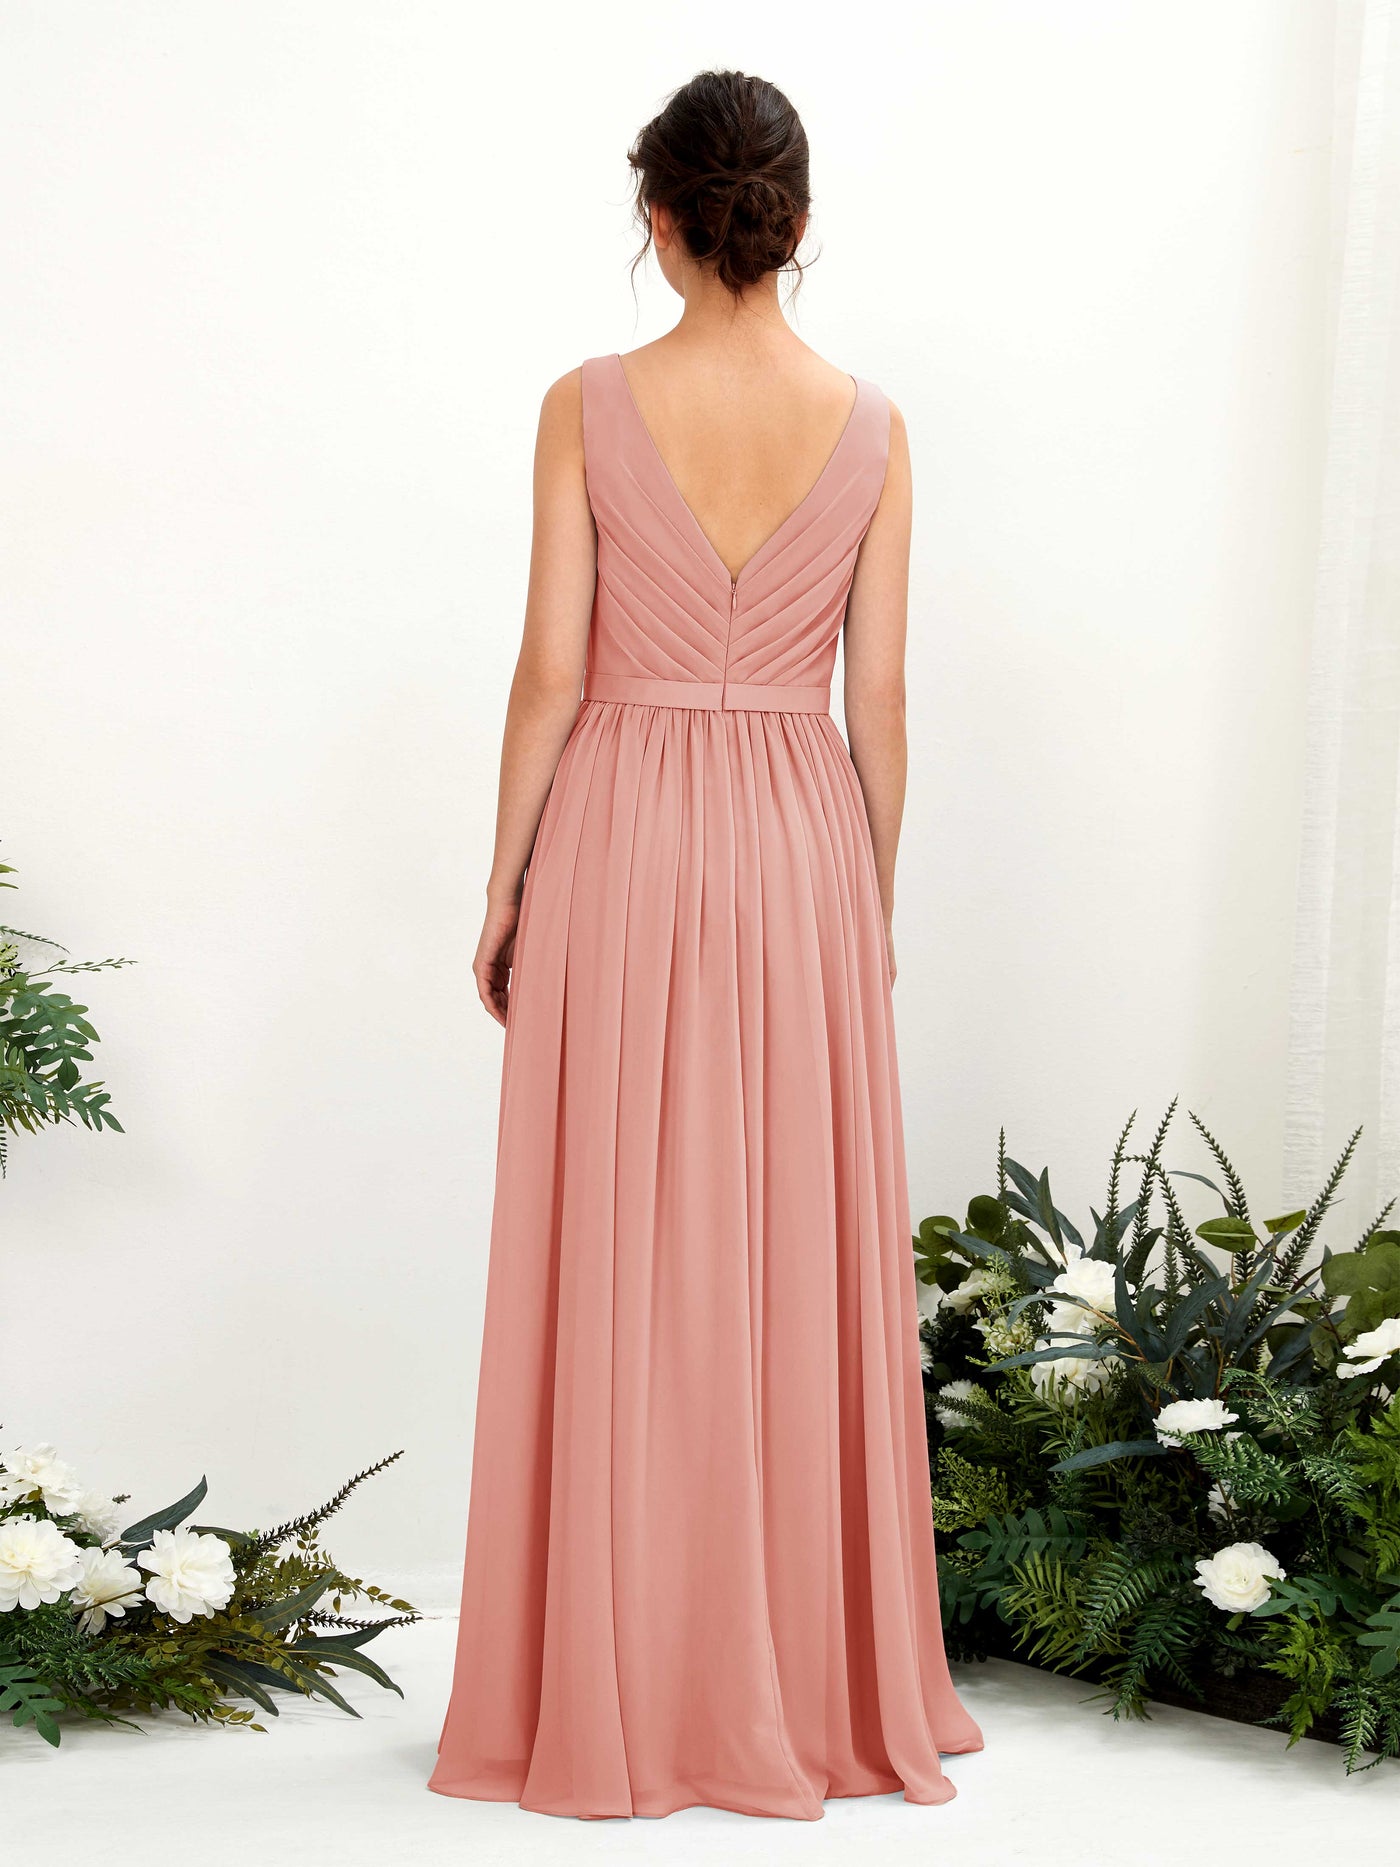 Champagne Rose Bridesmaid Dresses Bridesmaid Dress A-line Chiffon V-neck Full Length Sleeveless Wedding Party Dress (81223606)#color_champagne-rose